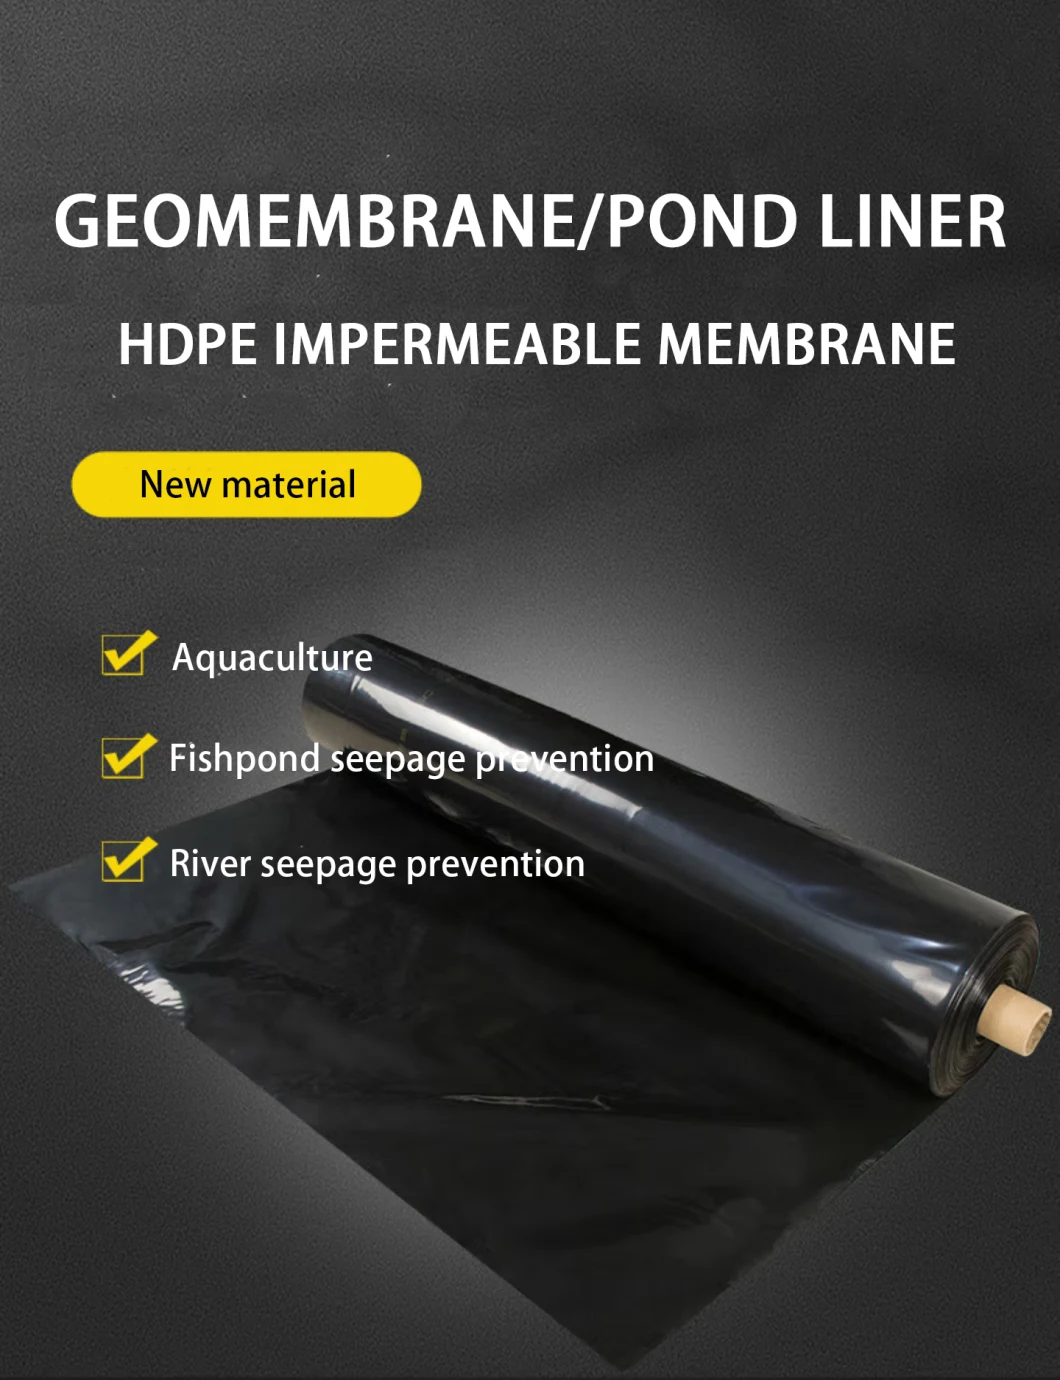 HDPE PVC 1mm Dam Pond Liner 1.5mm 2mm Landfill Biodigester Liners Geomembrane Global Sell